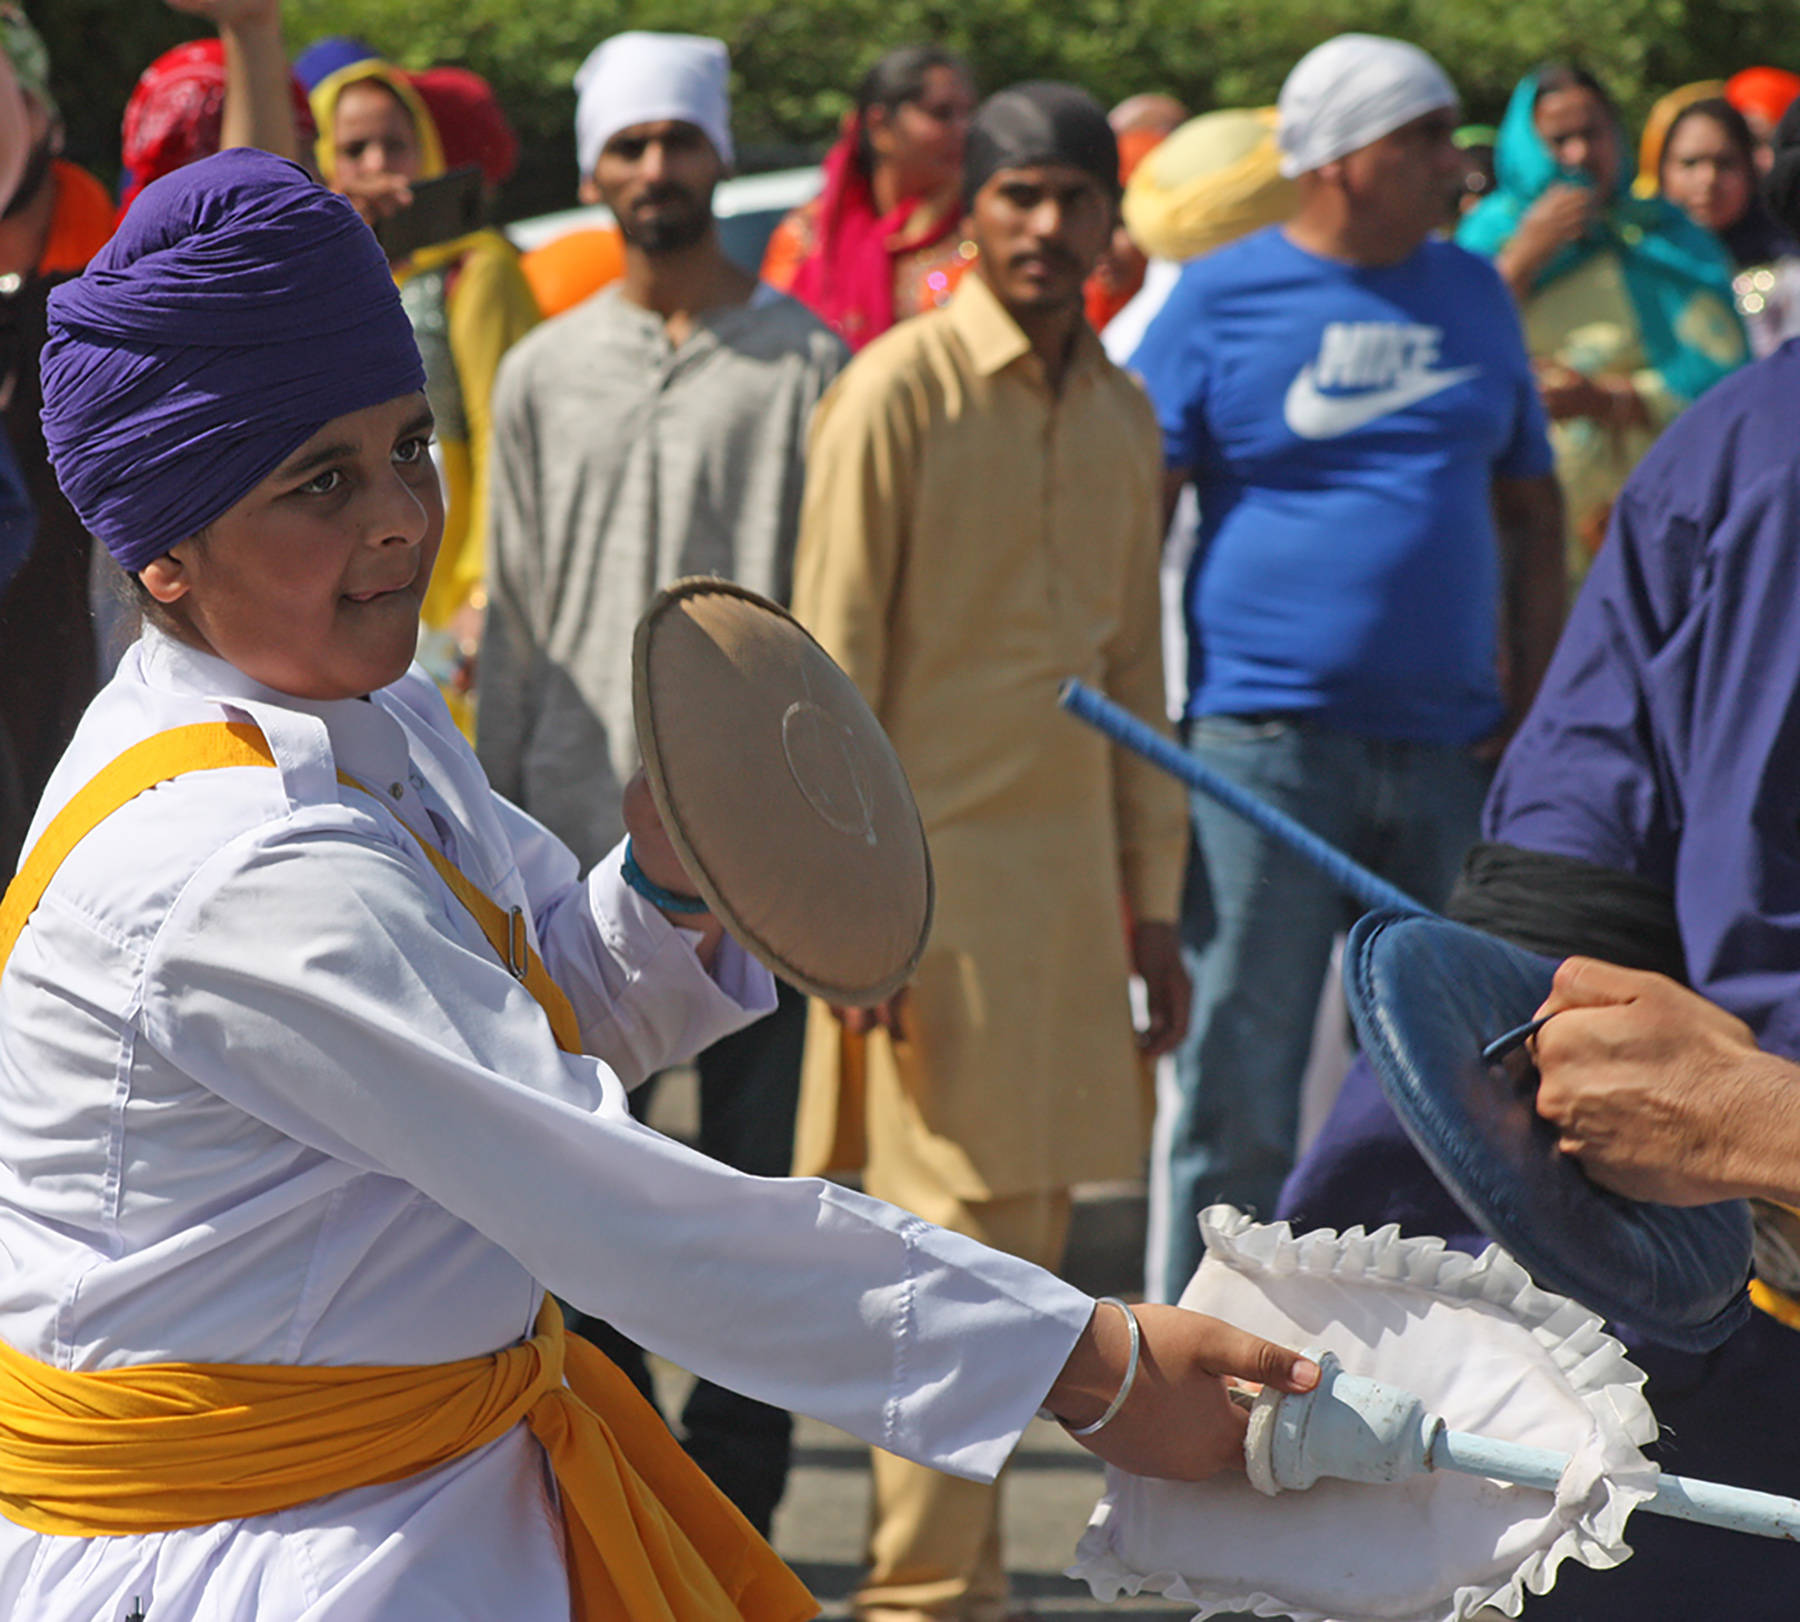 Combatants spar in a demonstration during the Khalsa Day parade through the streets of Kent on Sunday. MARK KLAAS, Kent Reporter